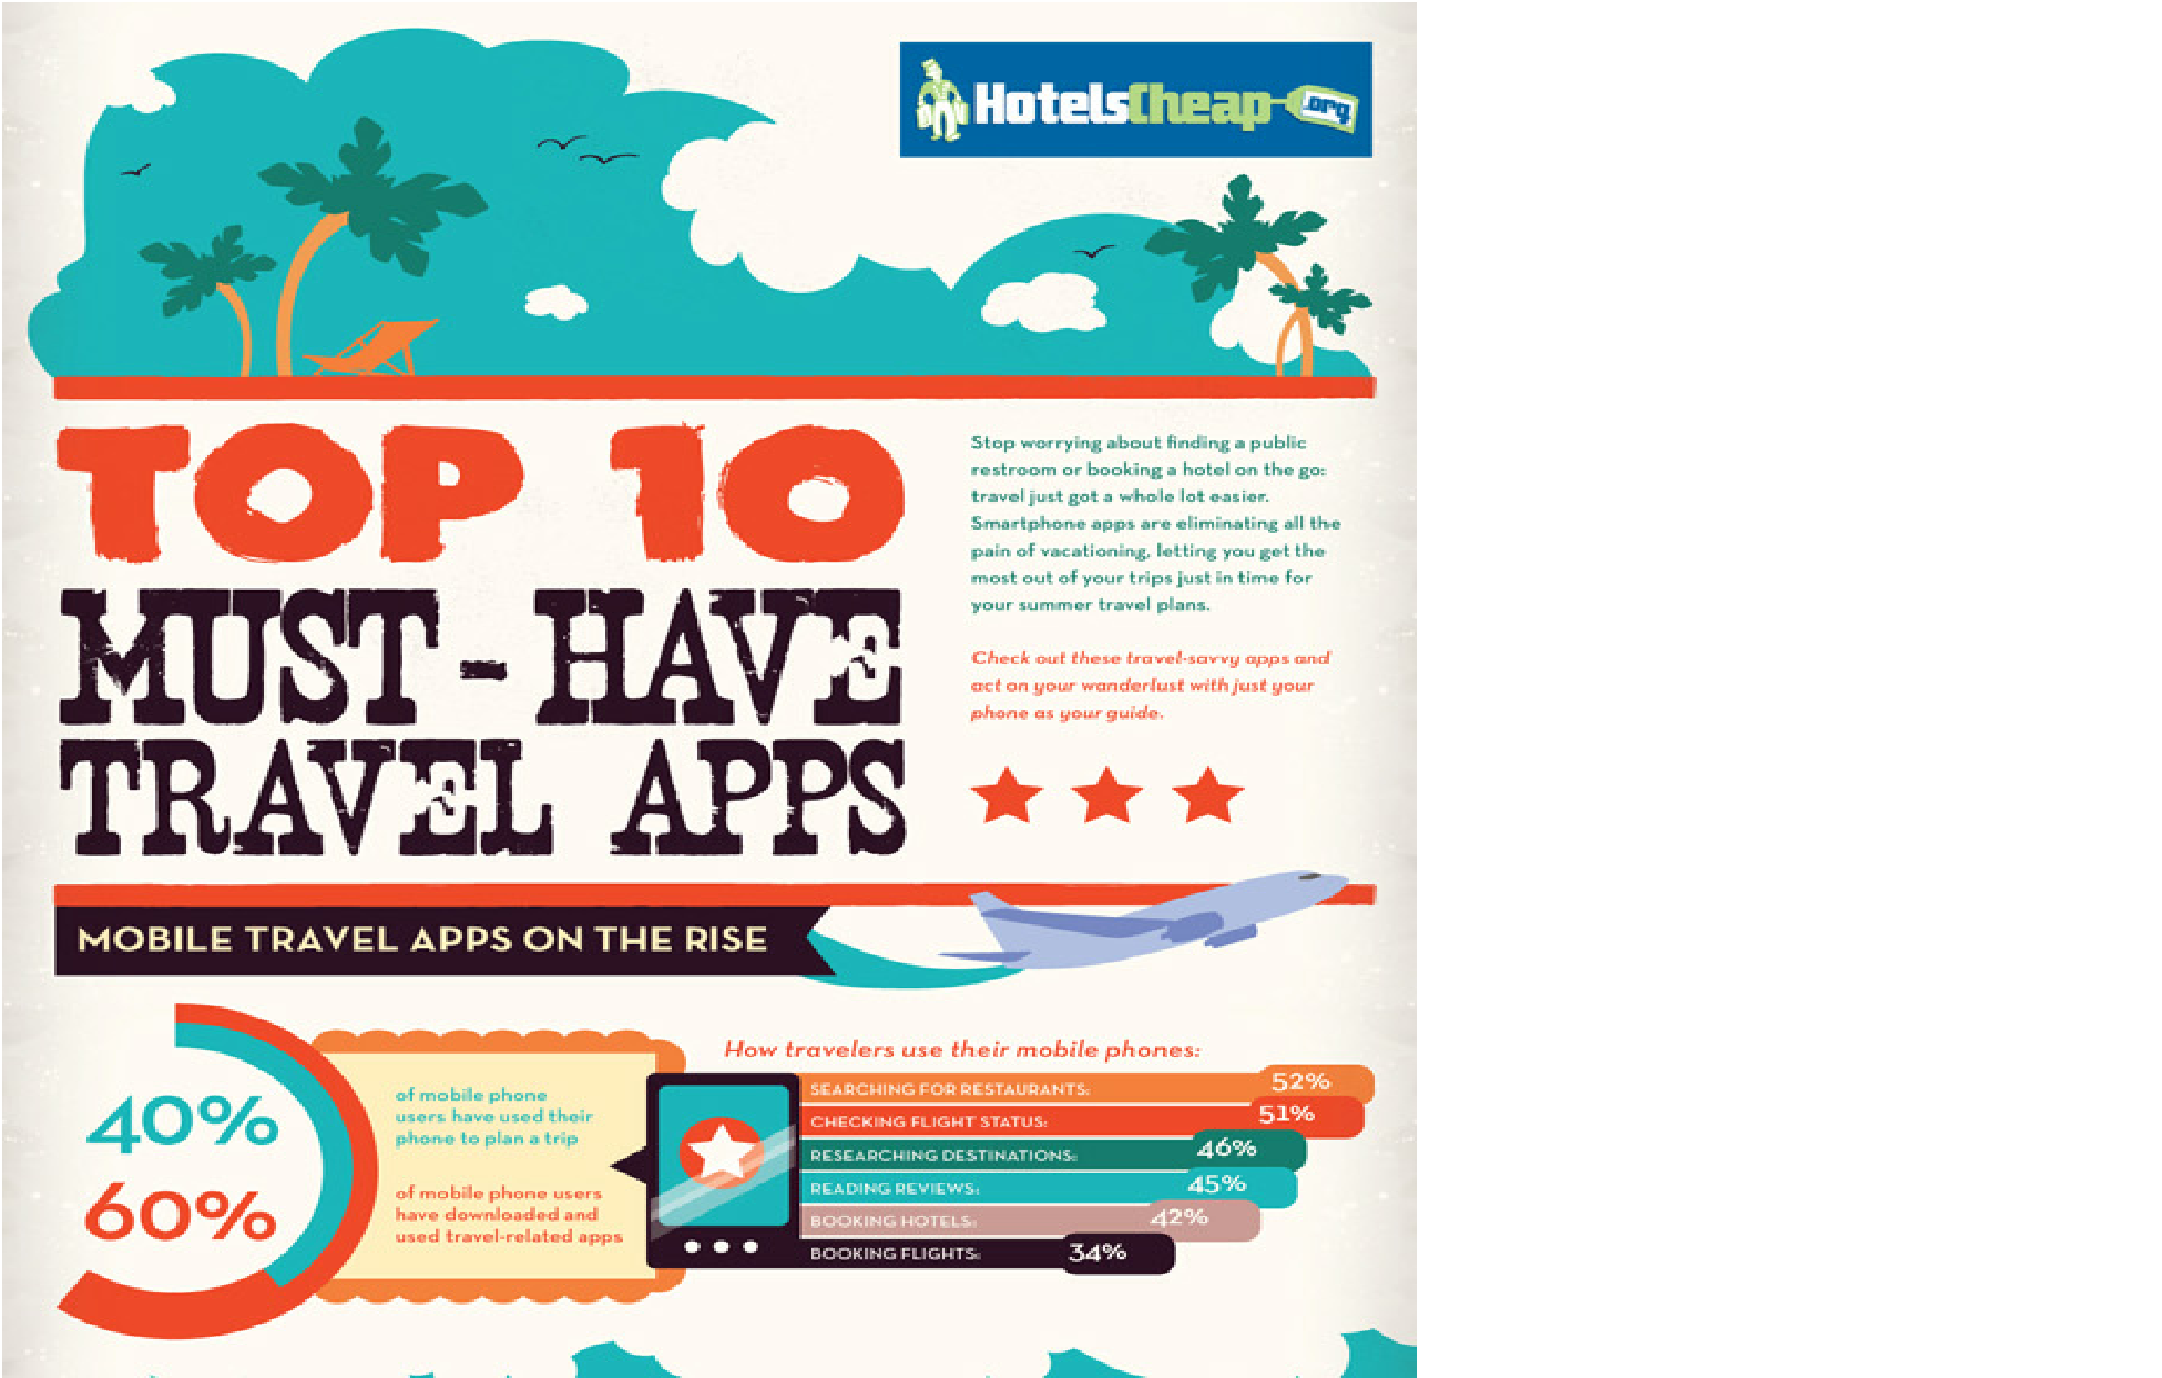 Top Ten Travel Apps – research study released by HotelsCheap.org